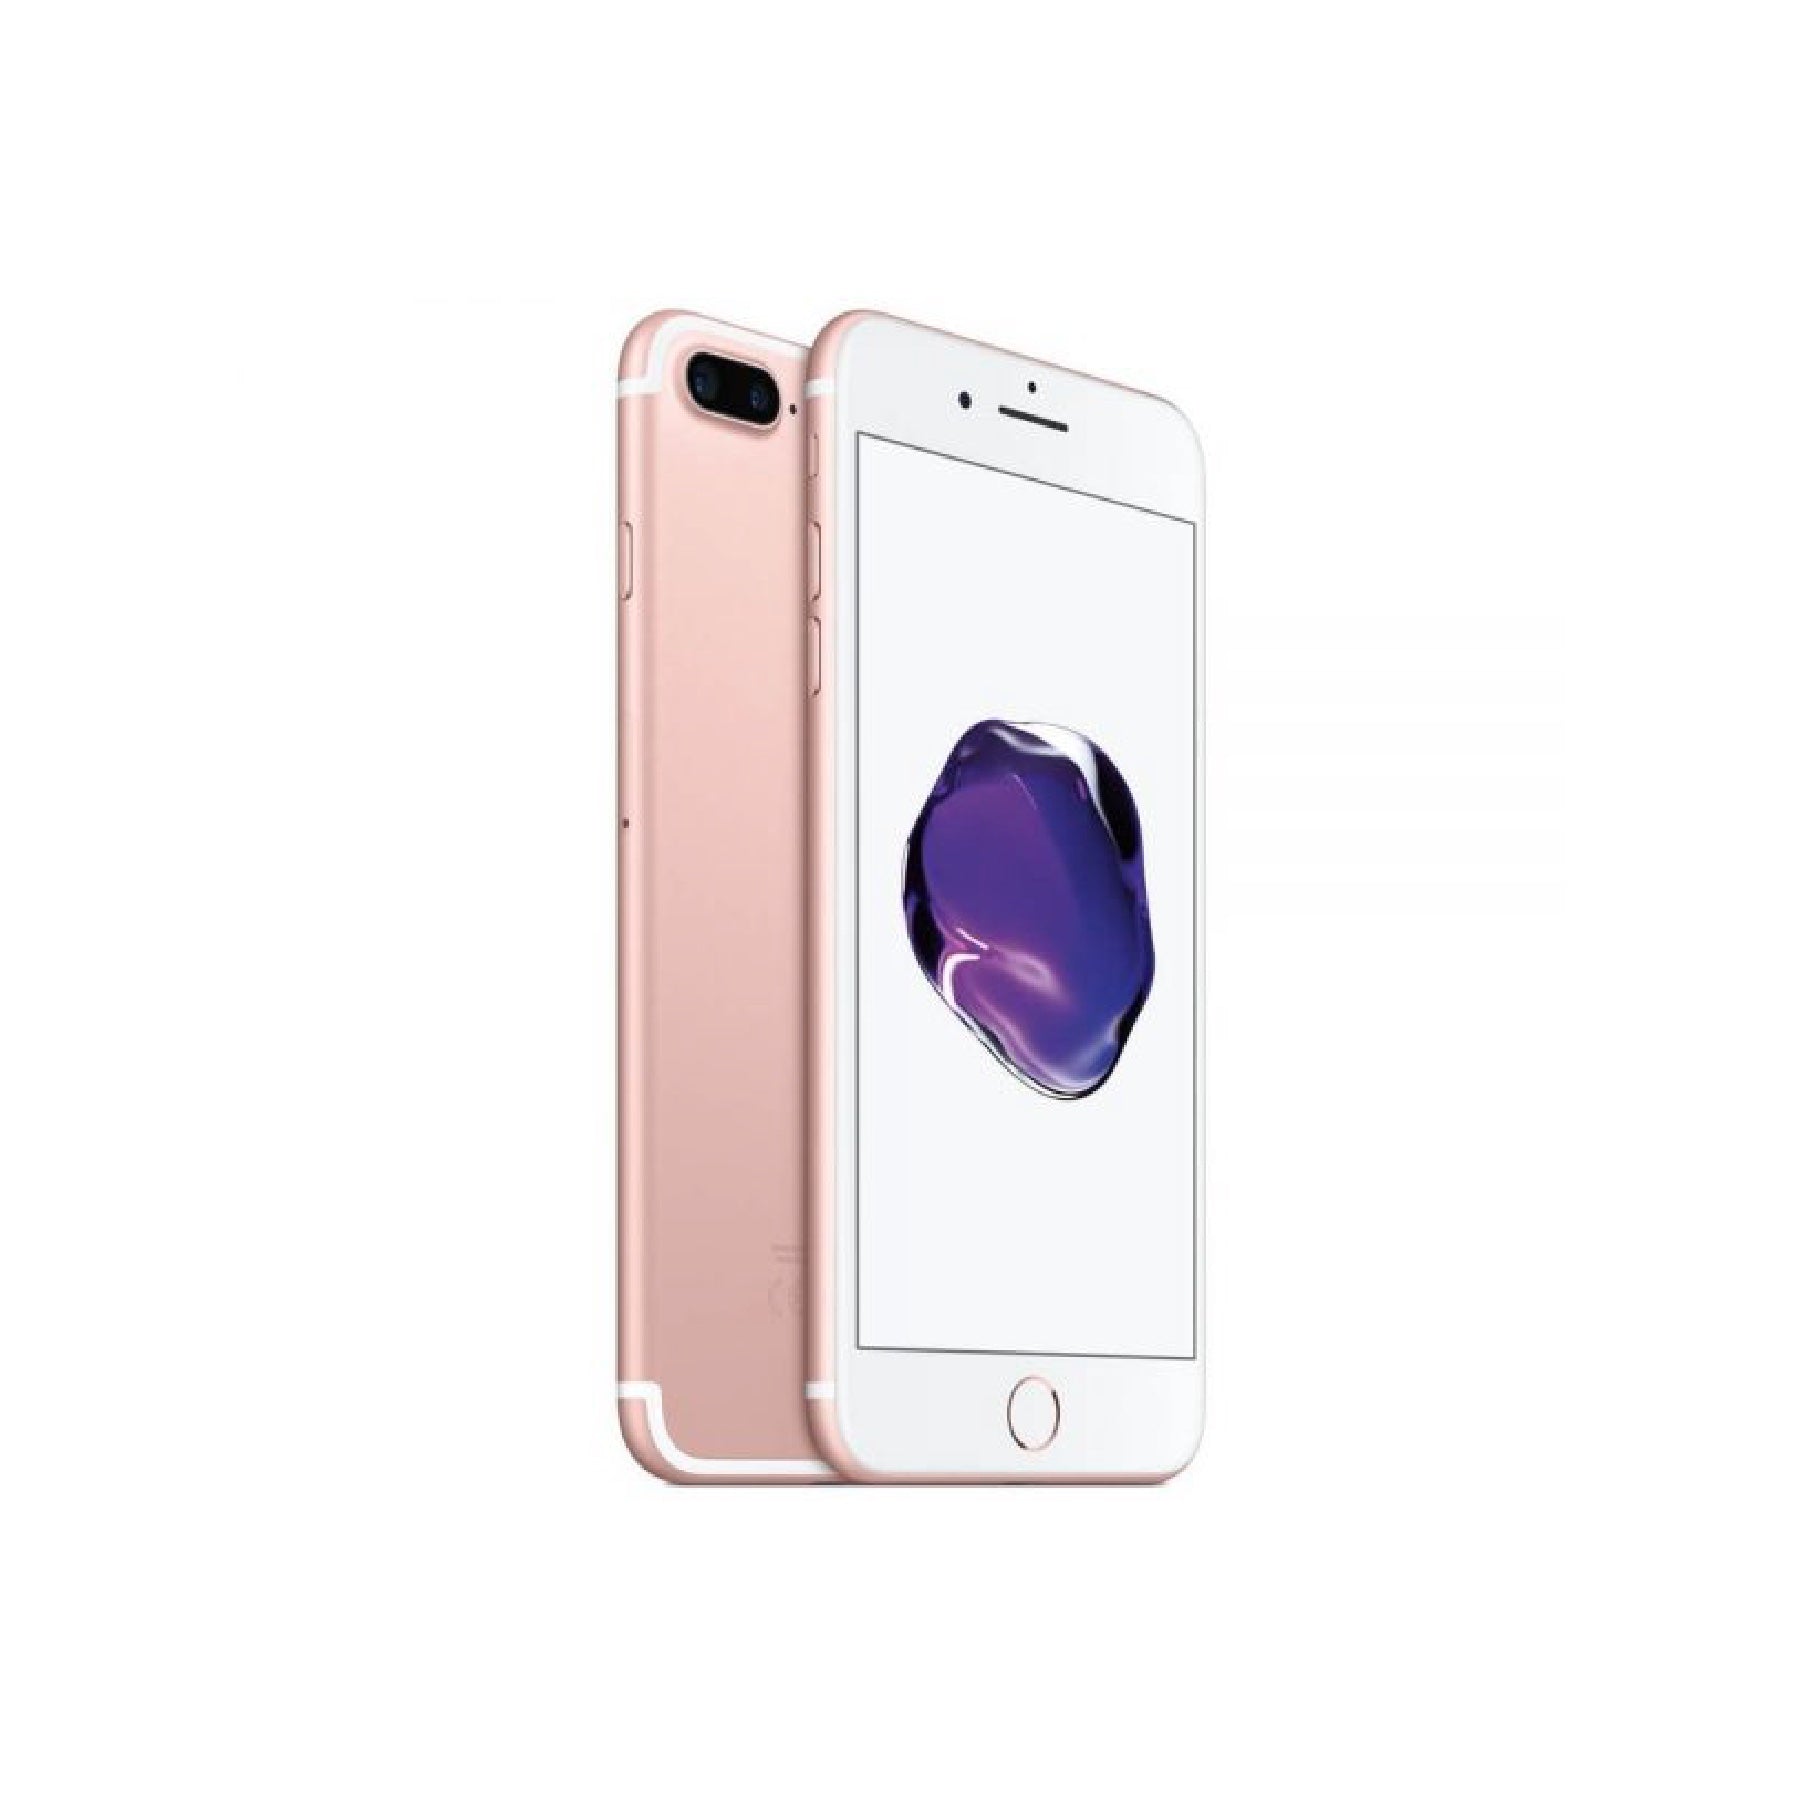 iPhone 7 Plus 32GB - Rose Gold (Best) - iStore Pre-owned